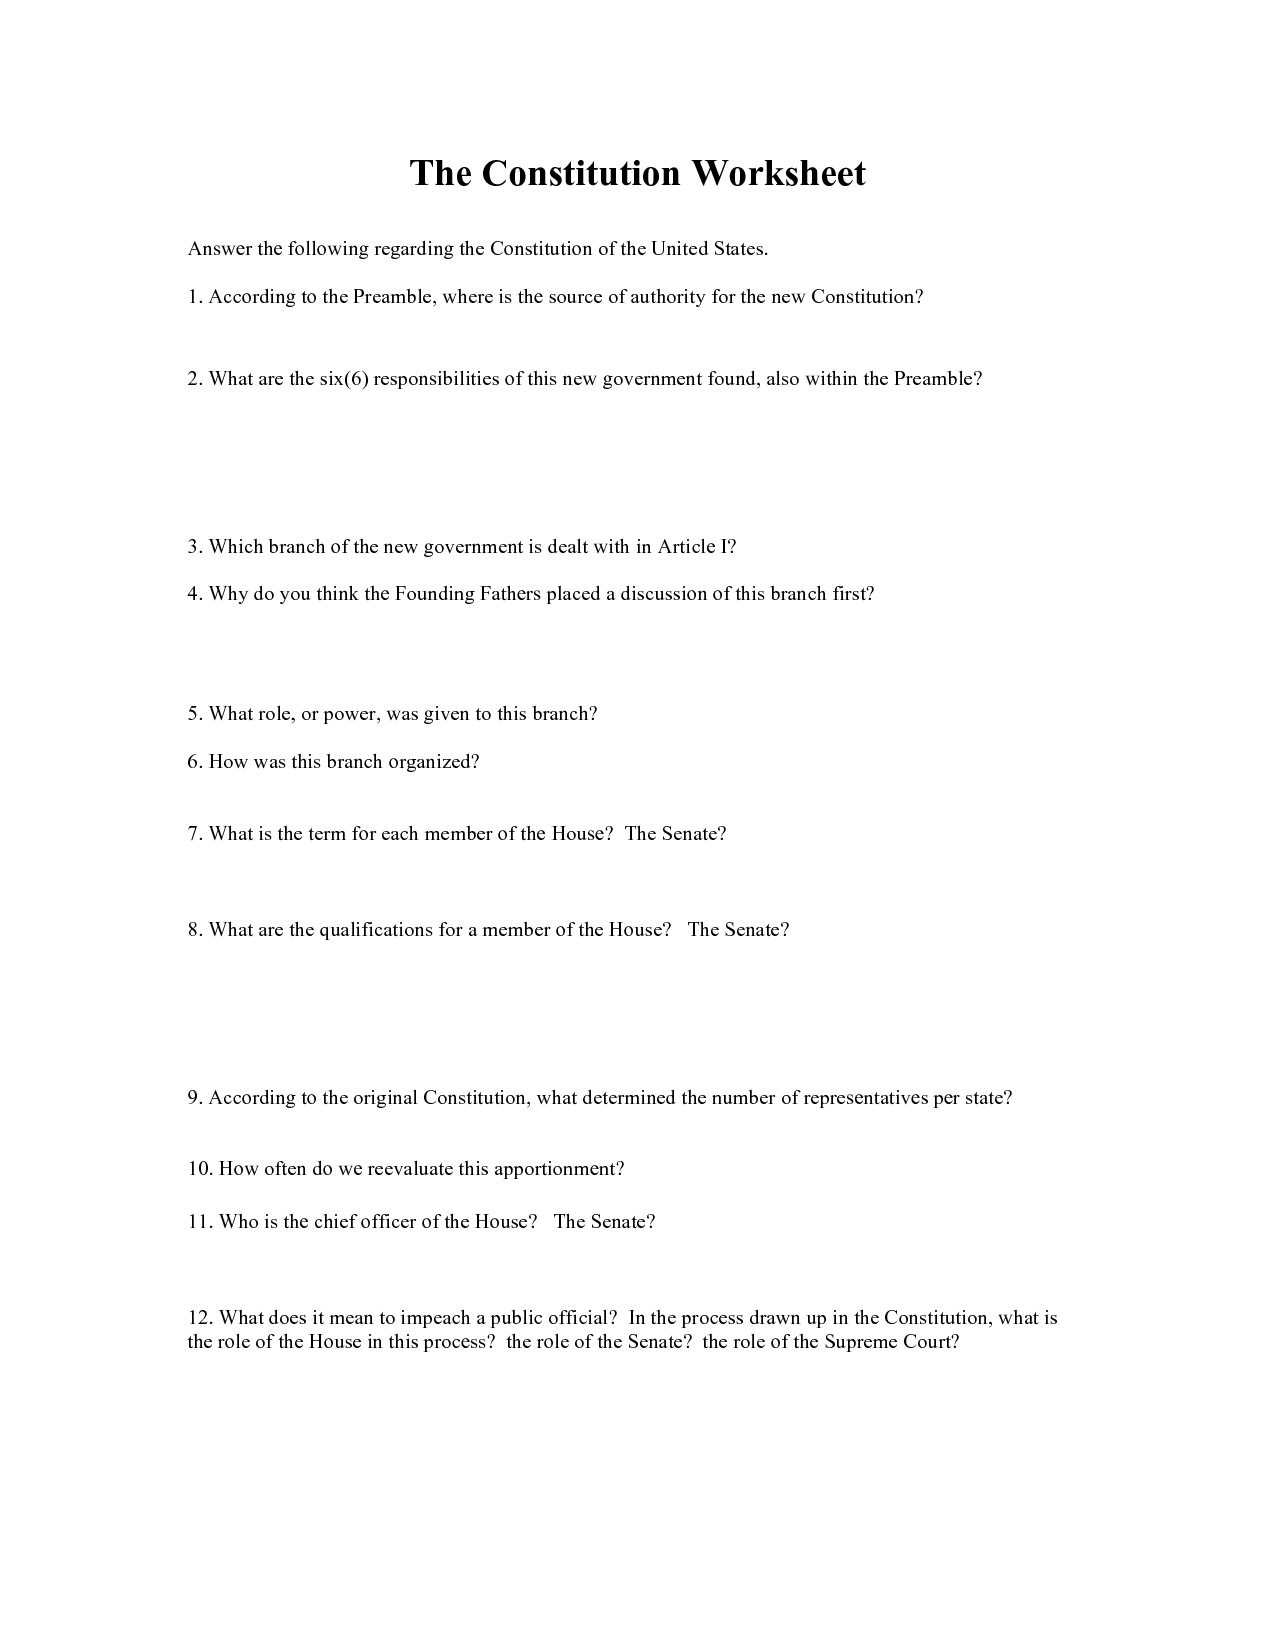 U.S. Constitution Worksheet Answers